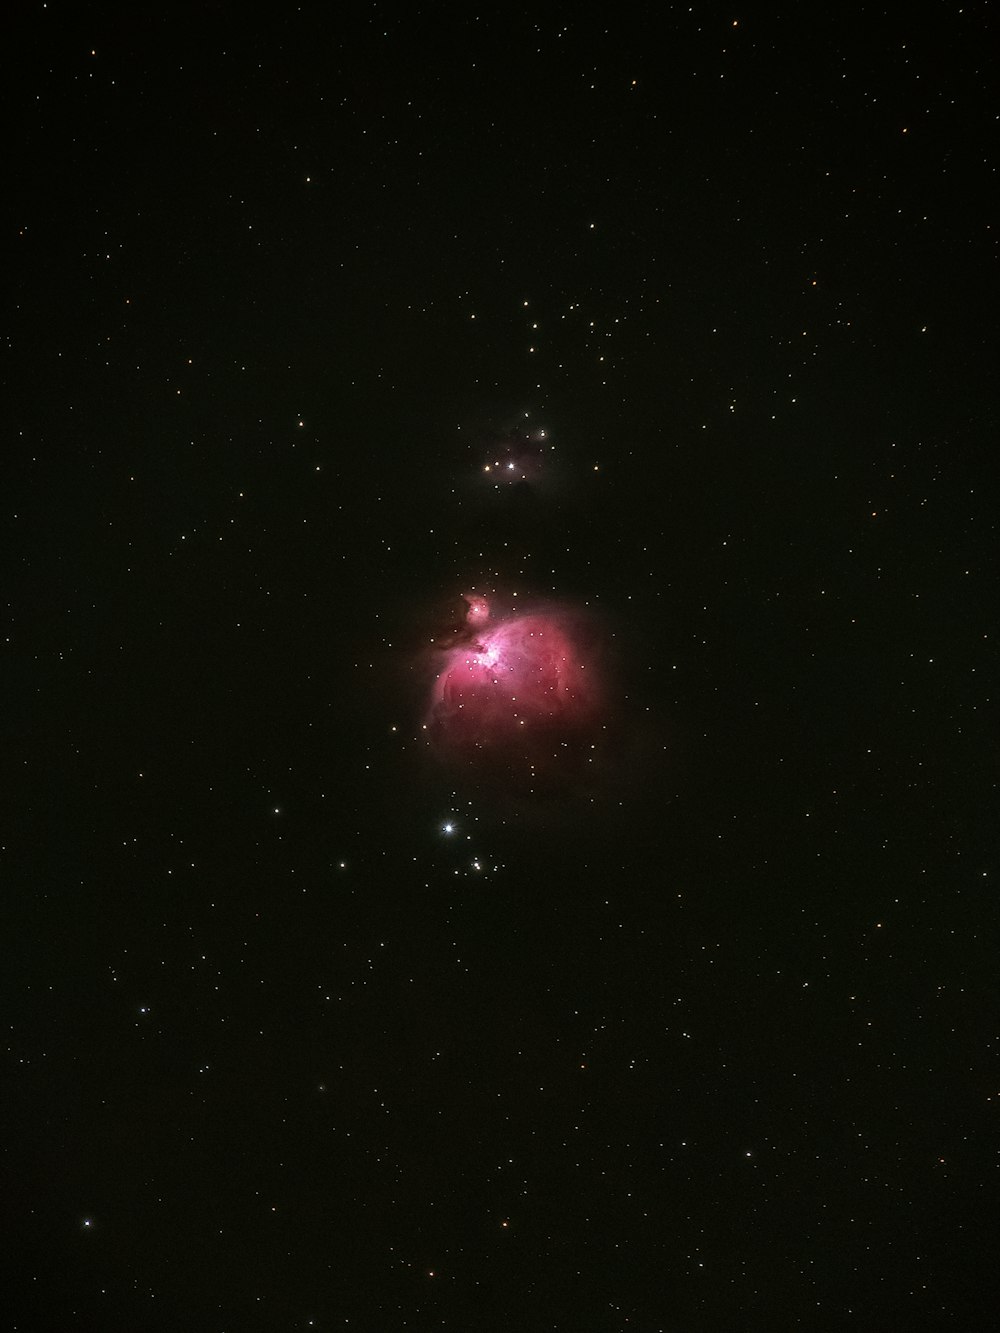 a very bright pink object in the middle of the night sky